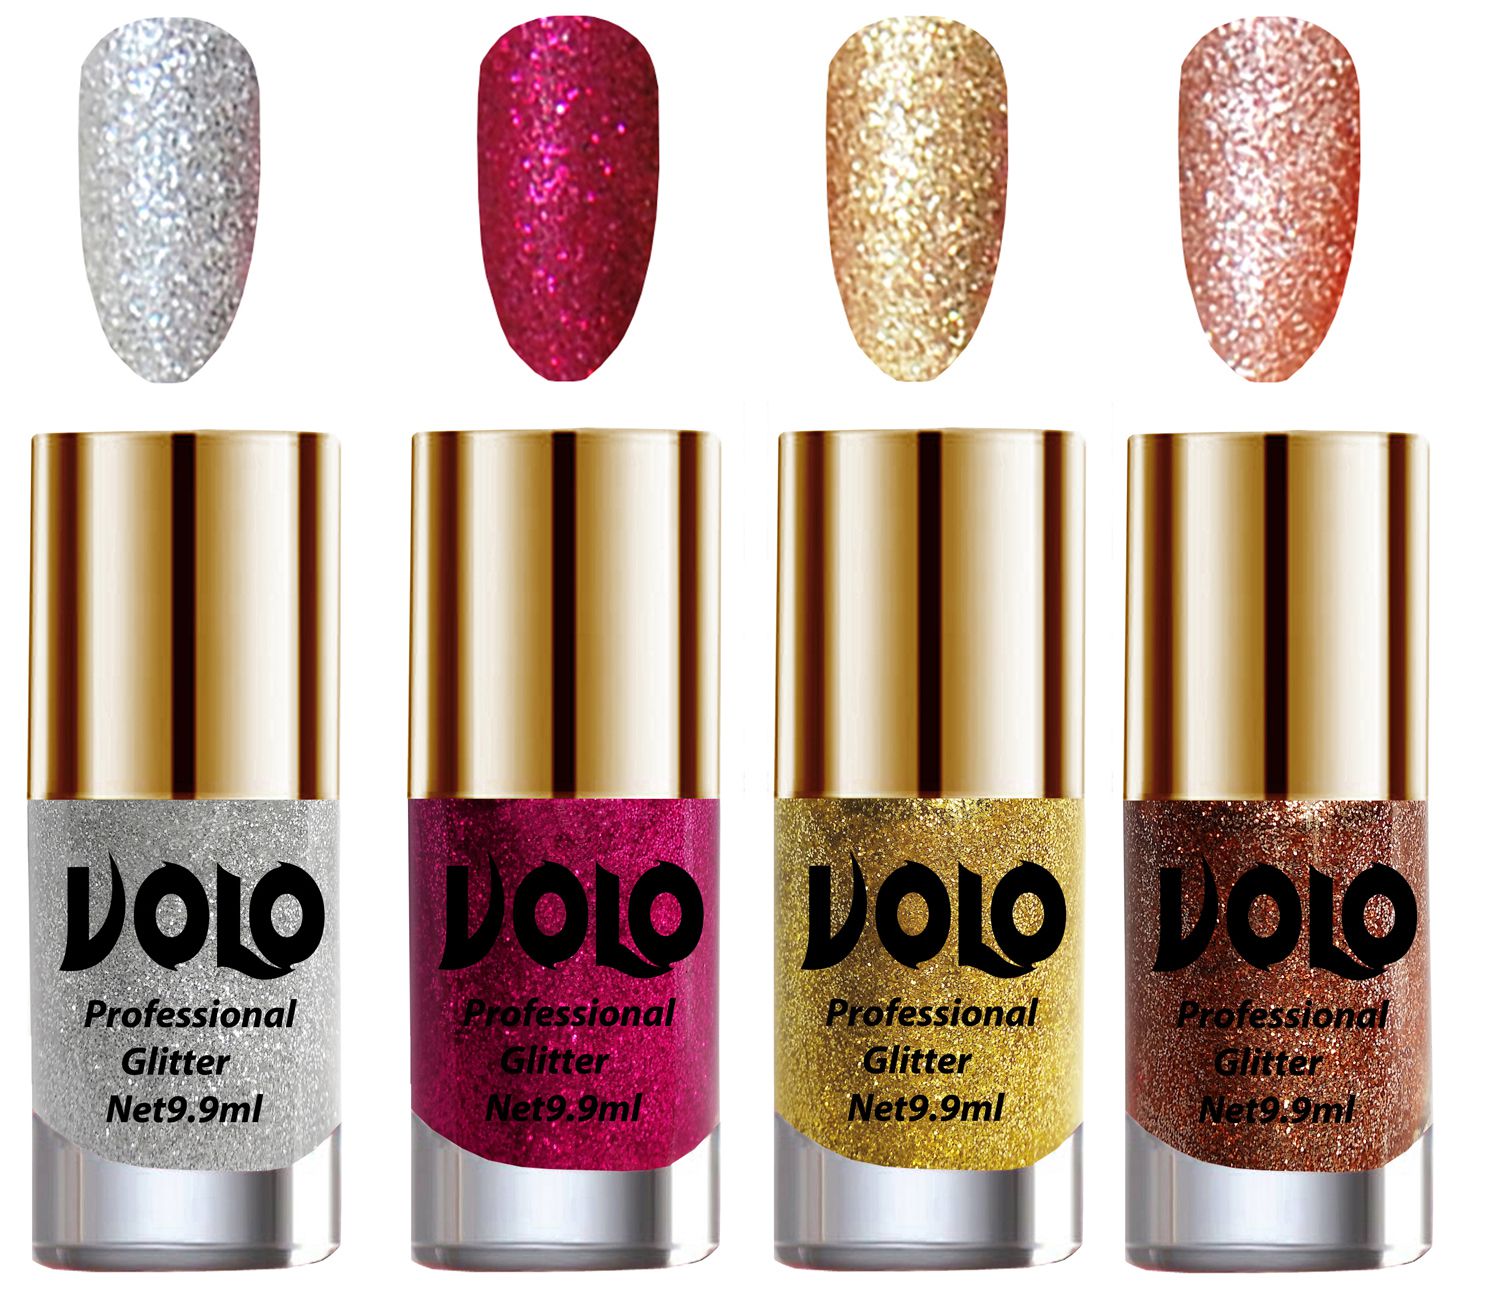     			VOLO Professionally Used Glitter Shine Nail Polish Silver,Magenta,Gold Pink Pack of 4 39 mL